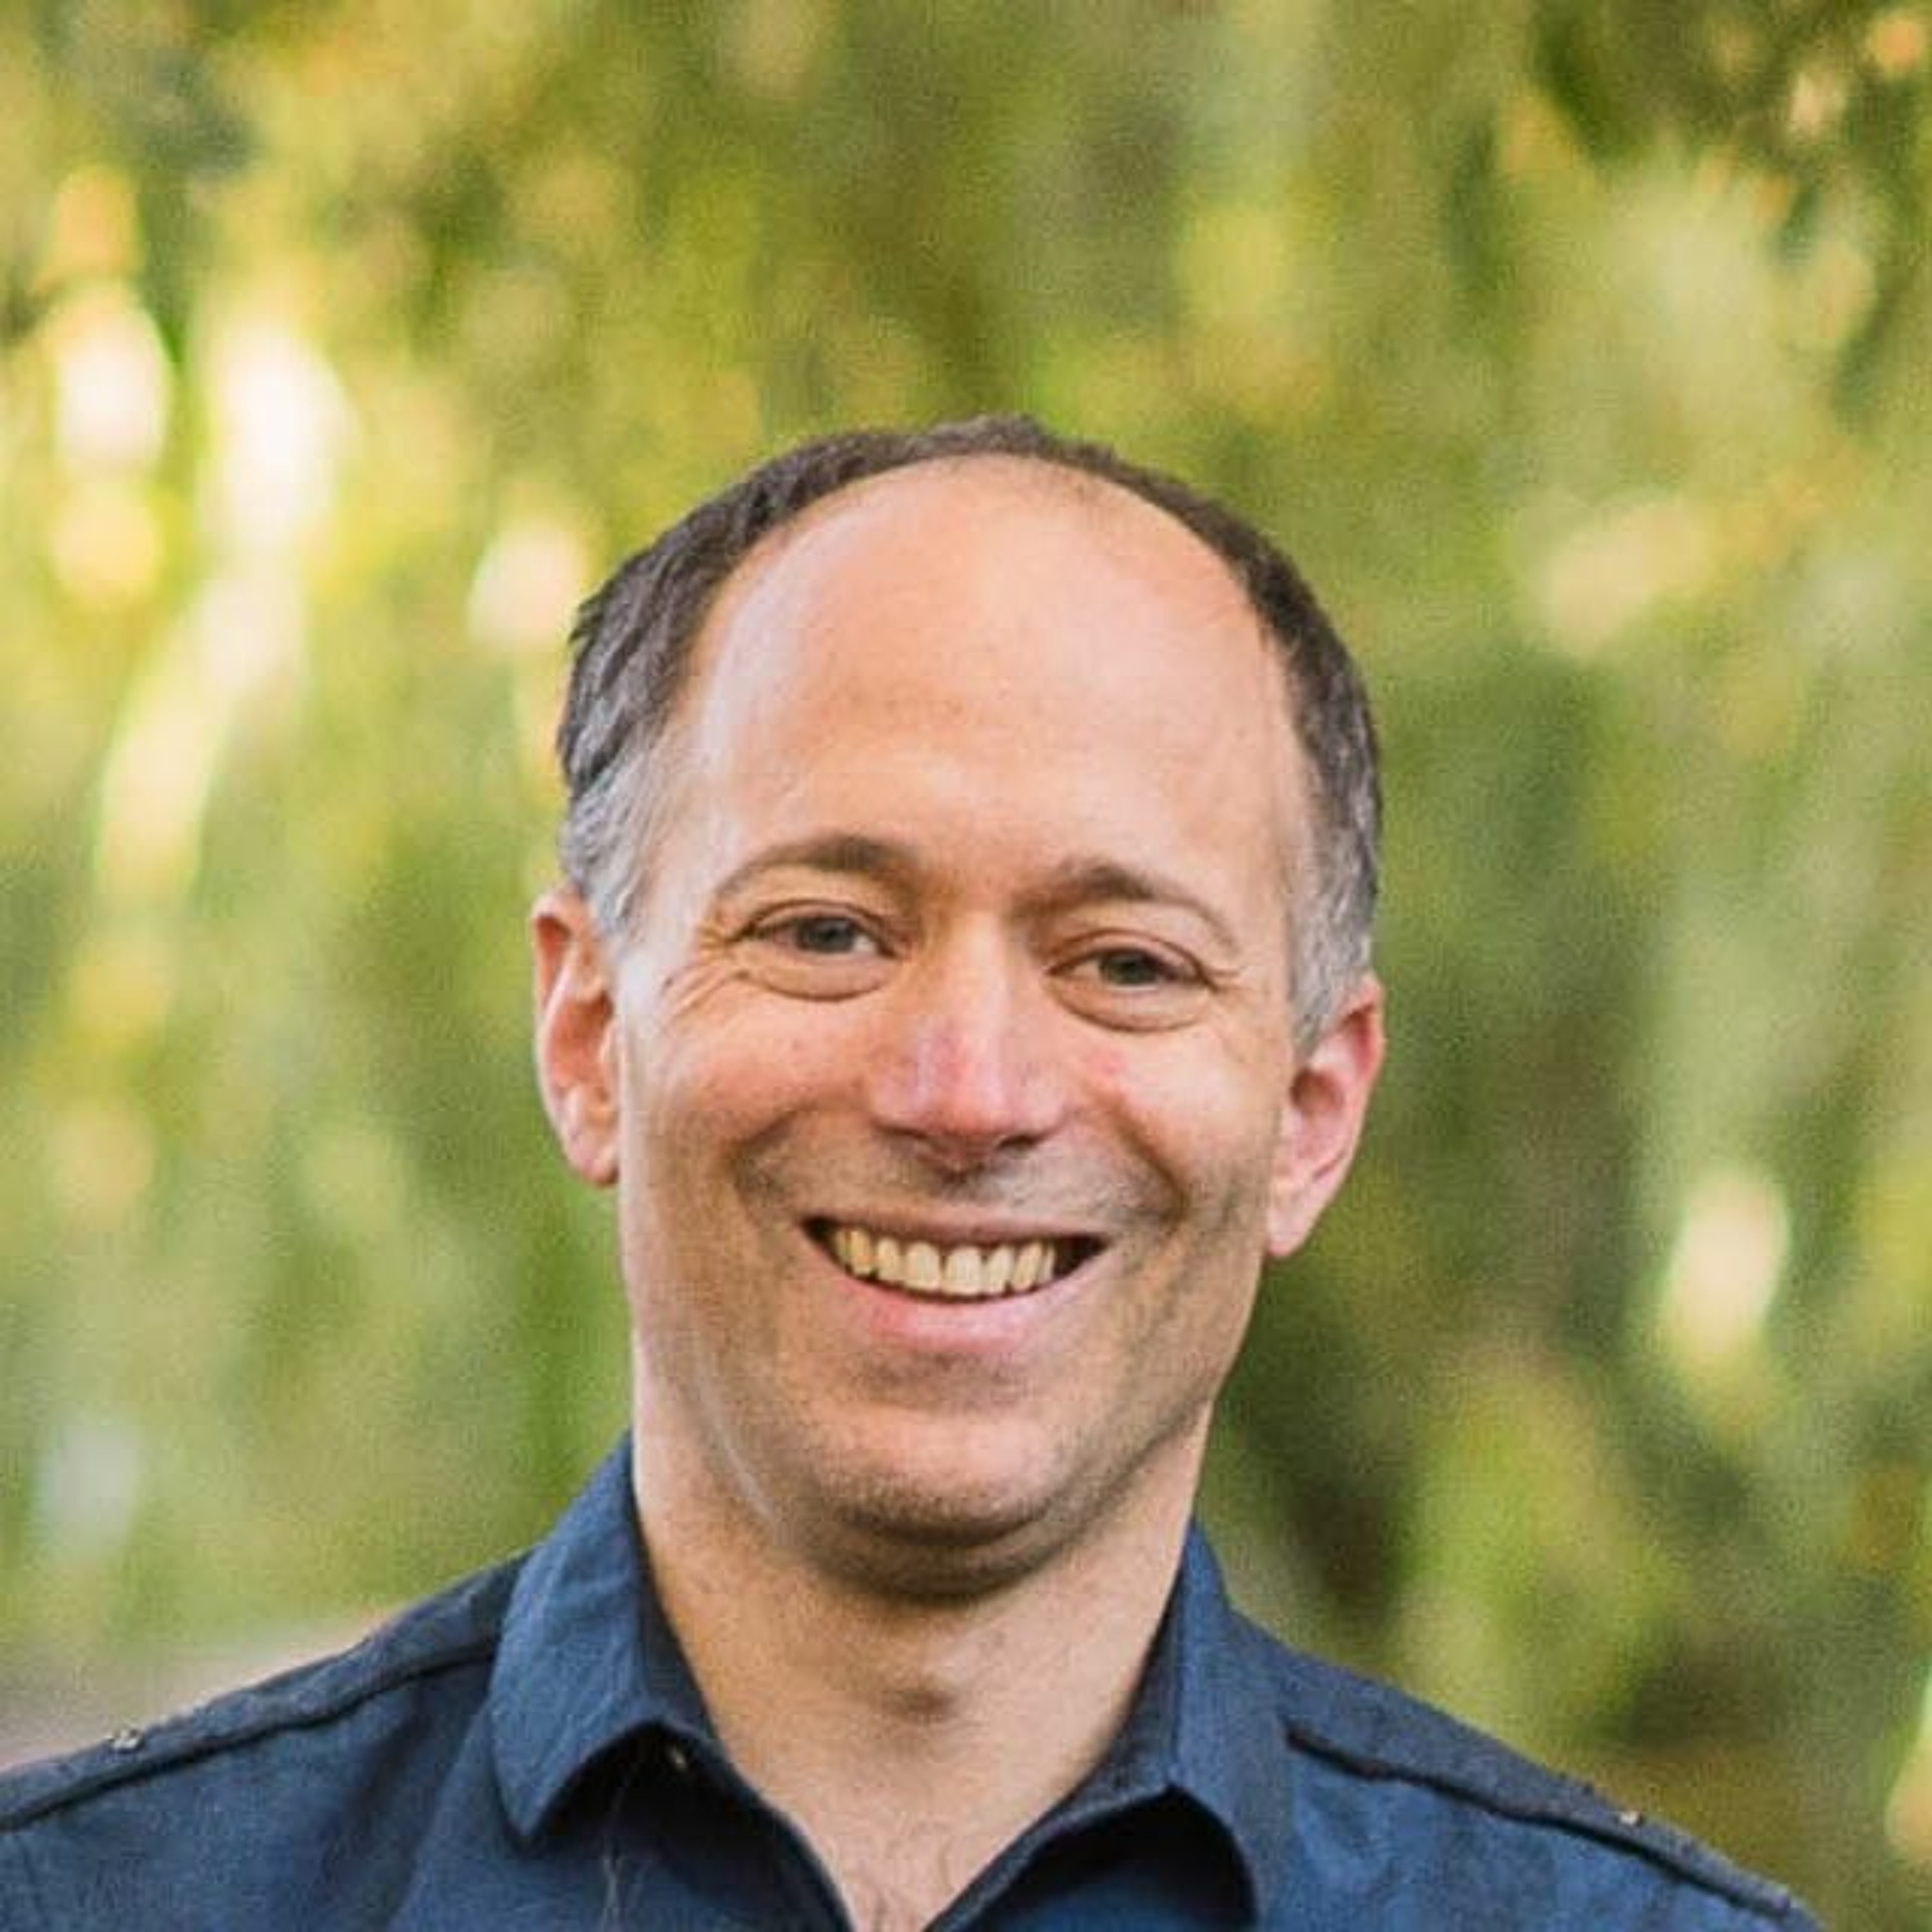 NVIDIA Research's Aaron Lefohn on What's Next at Intersection of AI and Computer Graphics – Ep. 125